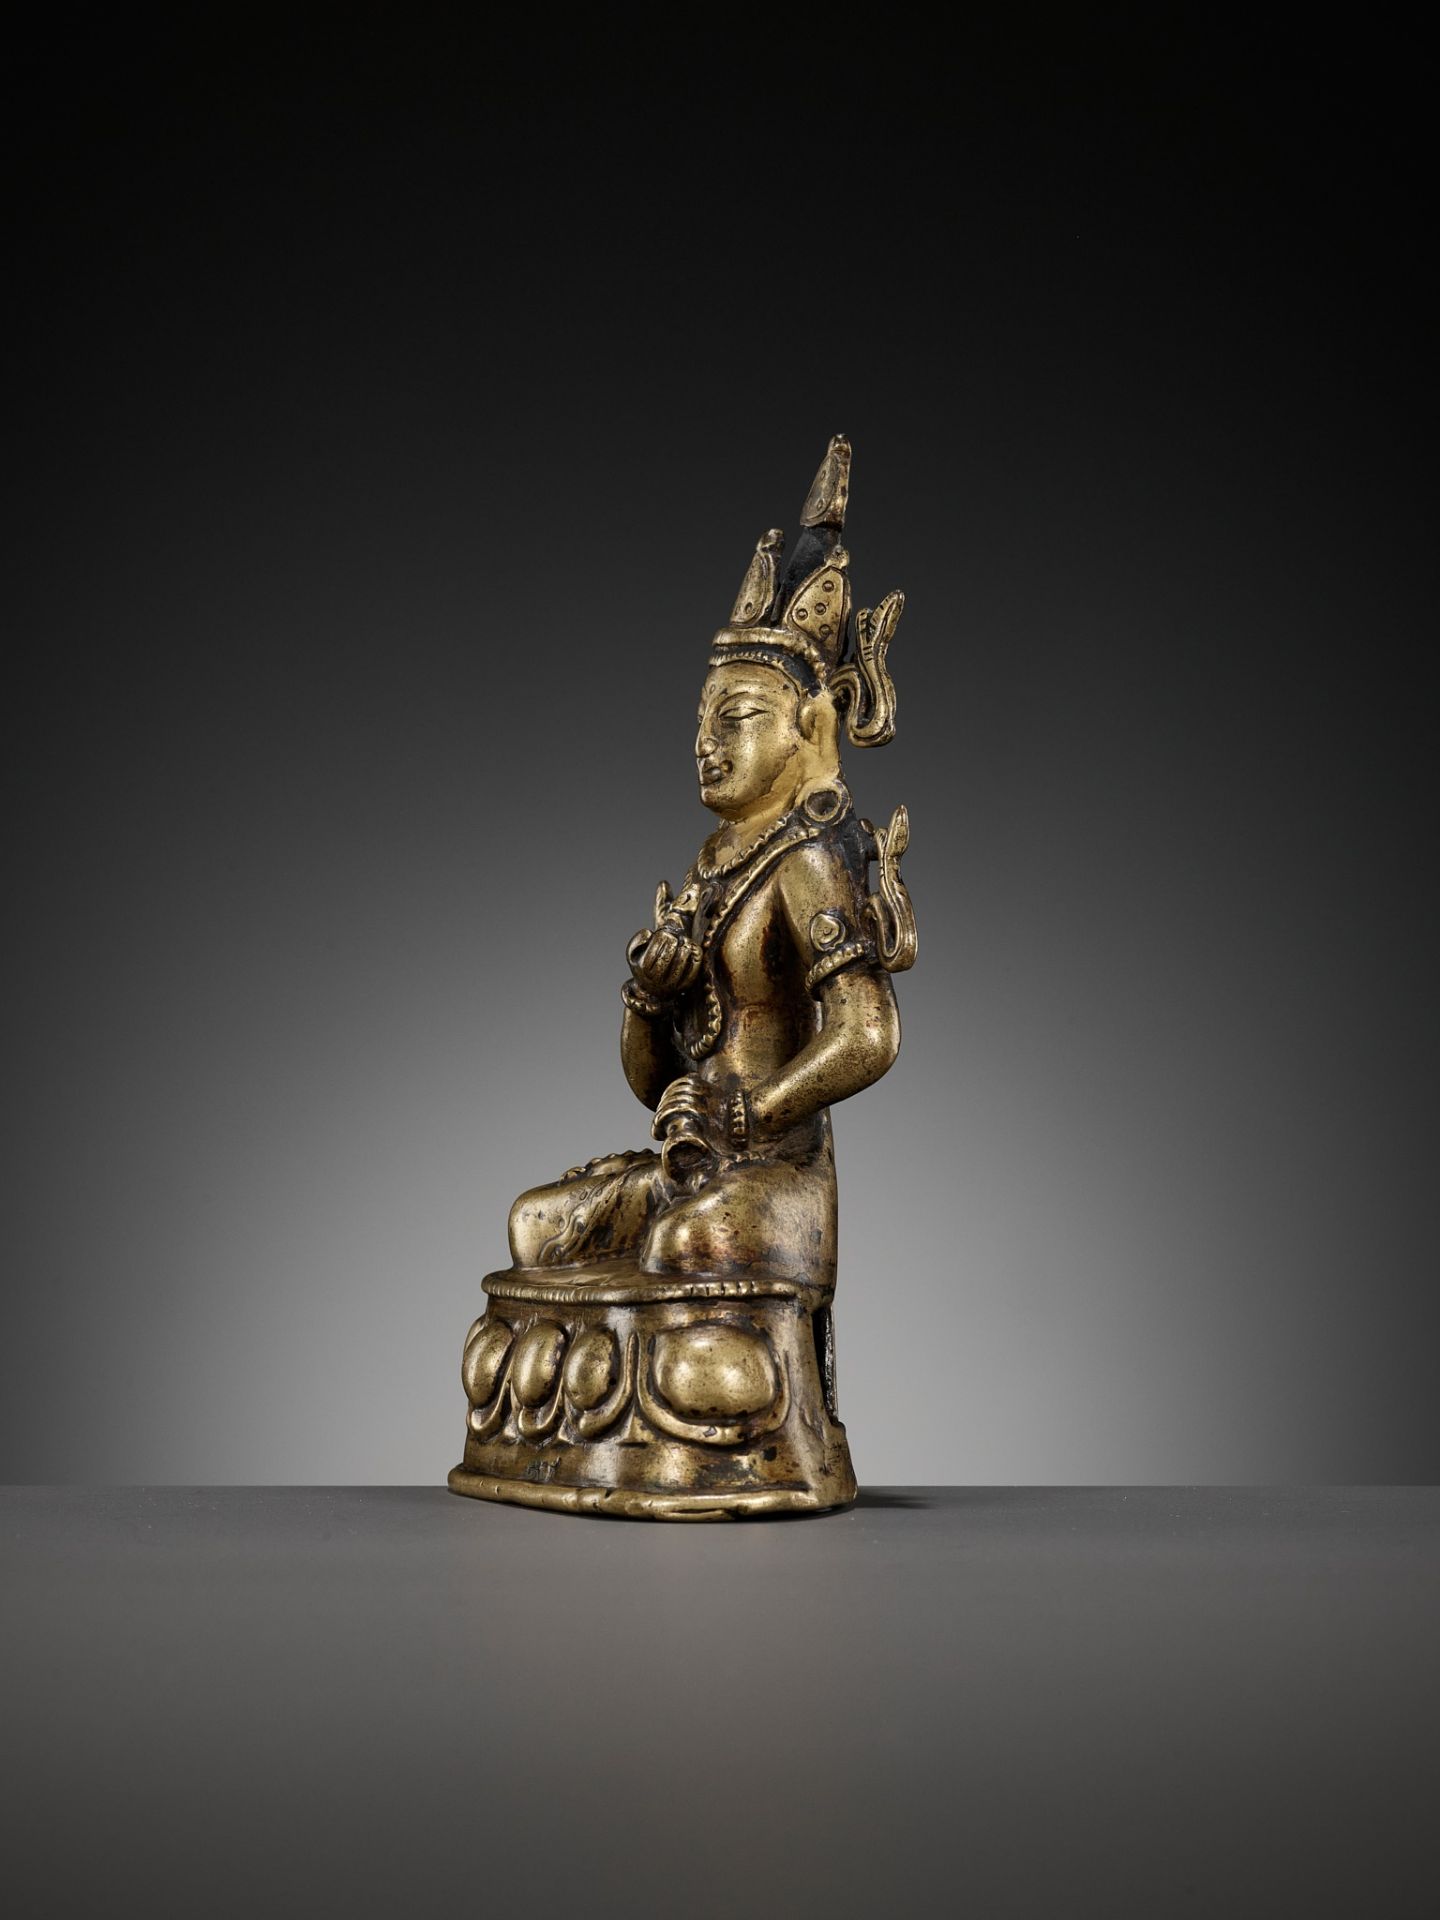 A GILT-BRONZE AND TURQUOISE-INLAID FIGURE OF VAJRASATTVA, KASHMIR STYLE, WEST TIBET, 12TH CENTURY - Image 6 of 10